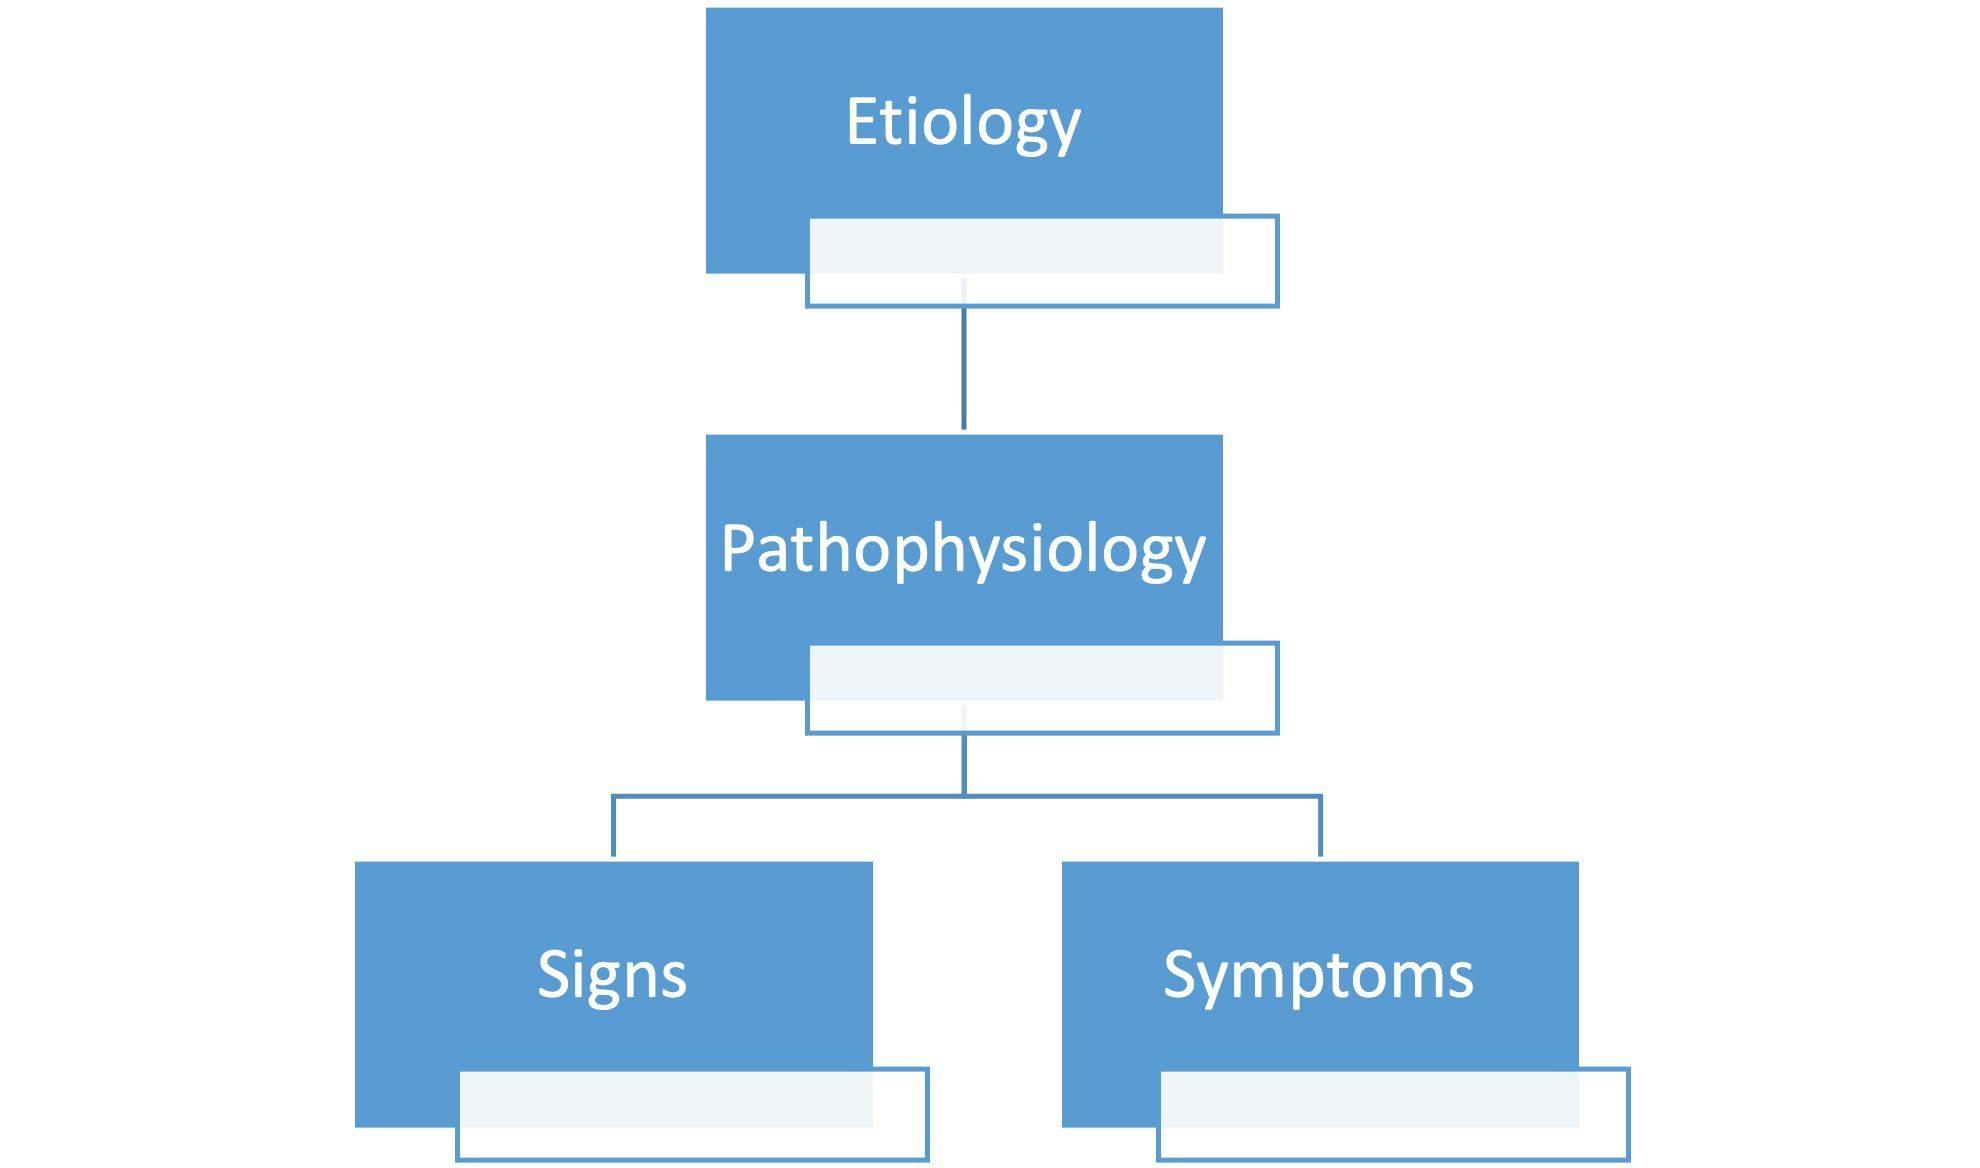 Figure 1. The Nature of Disease